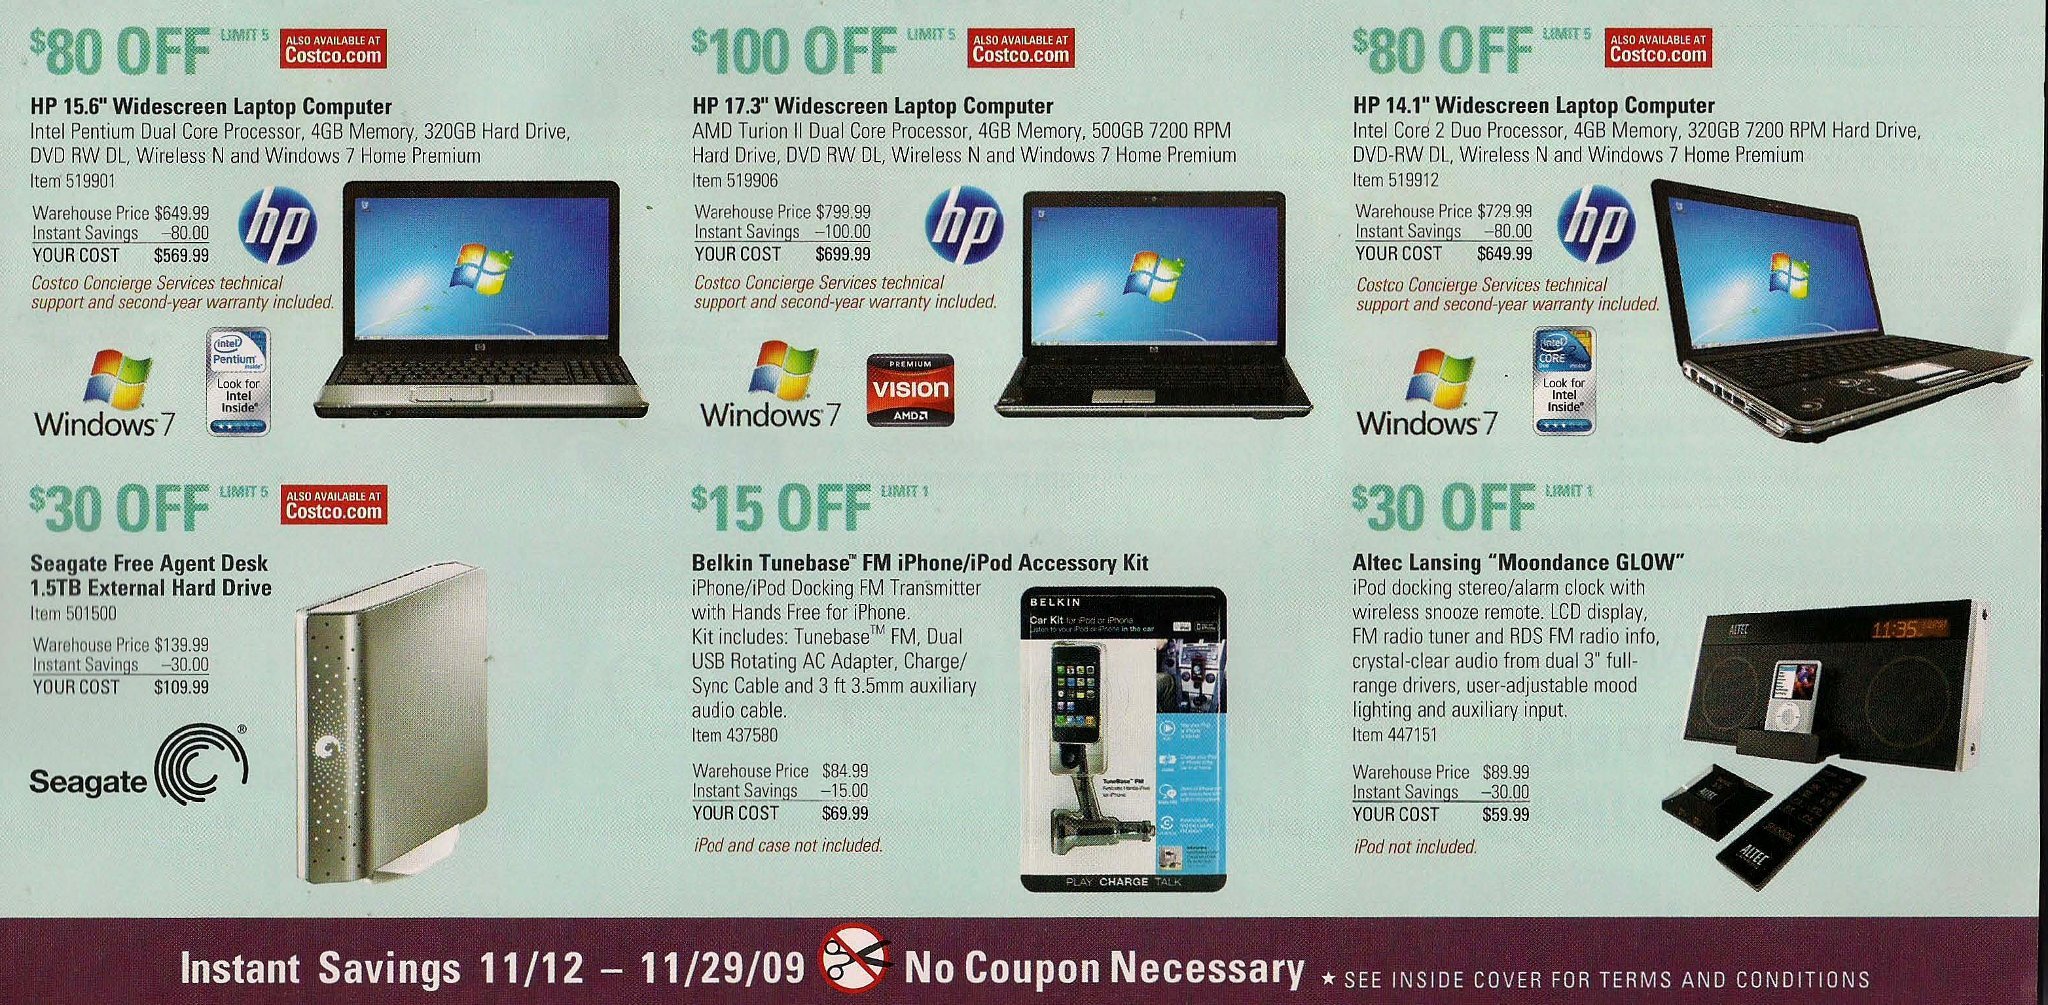 Coupon book page 11 in full-size.